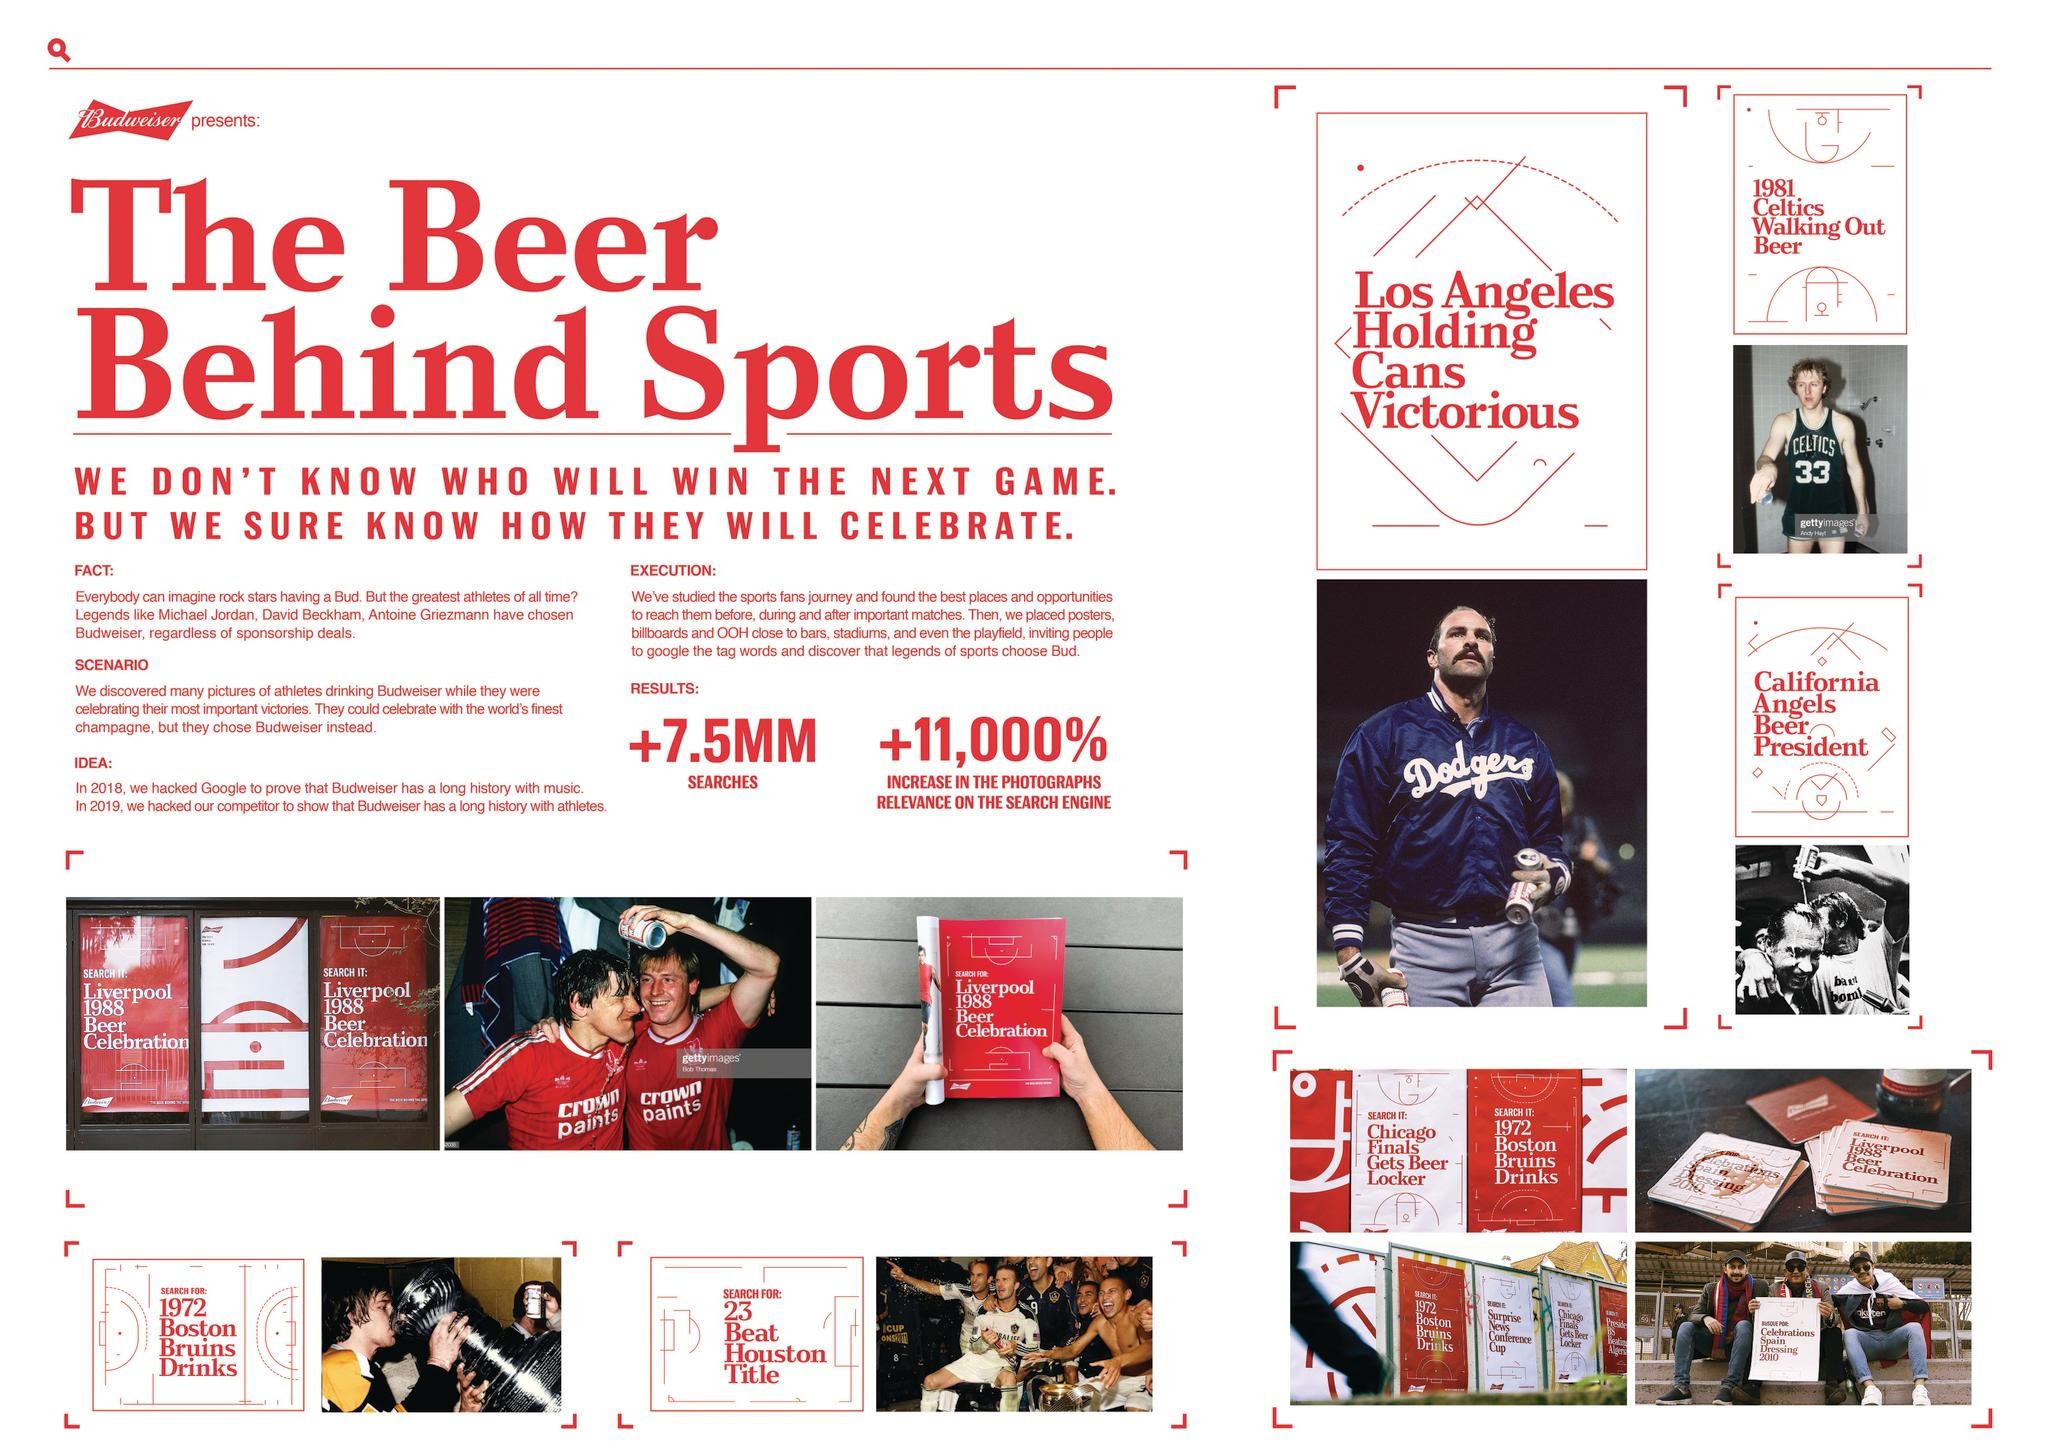 THE BEER BEHIND SPORTS